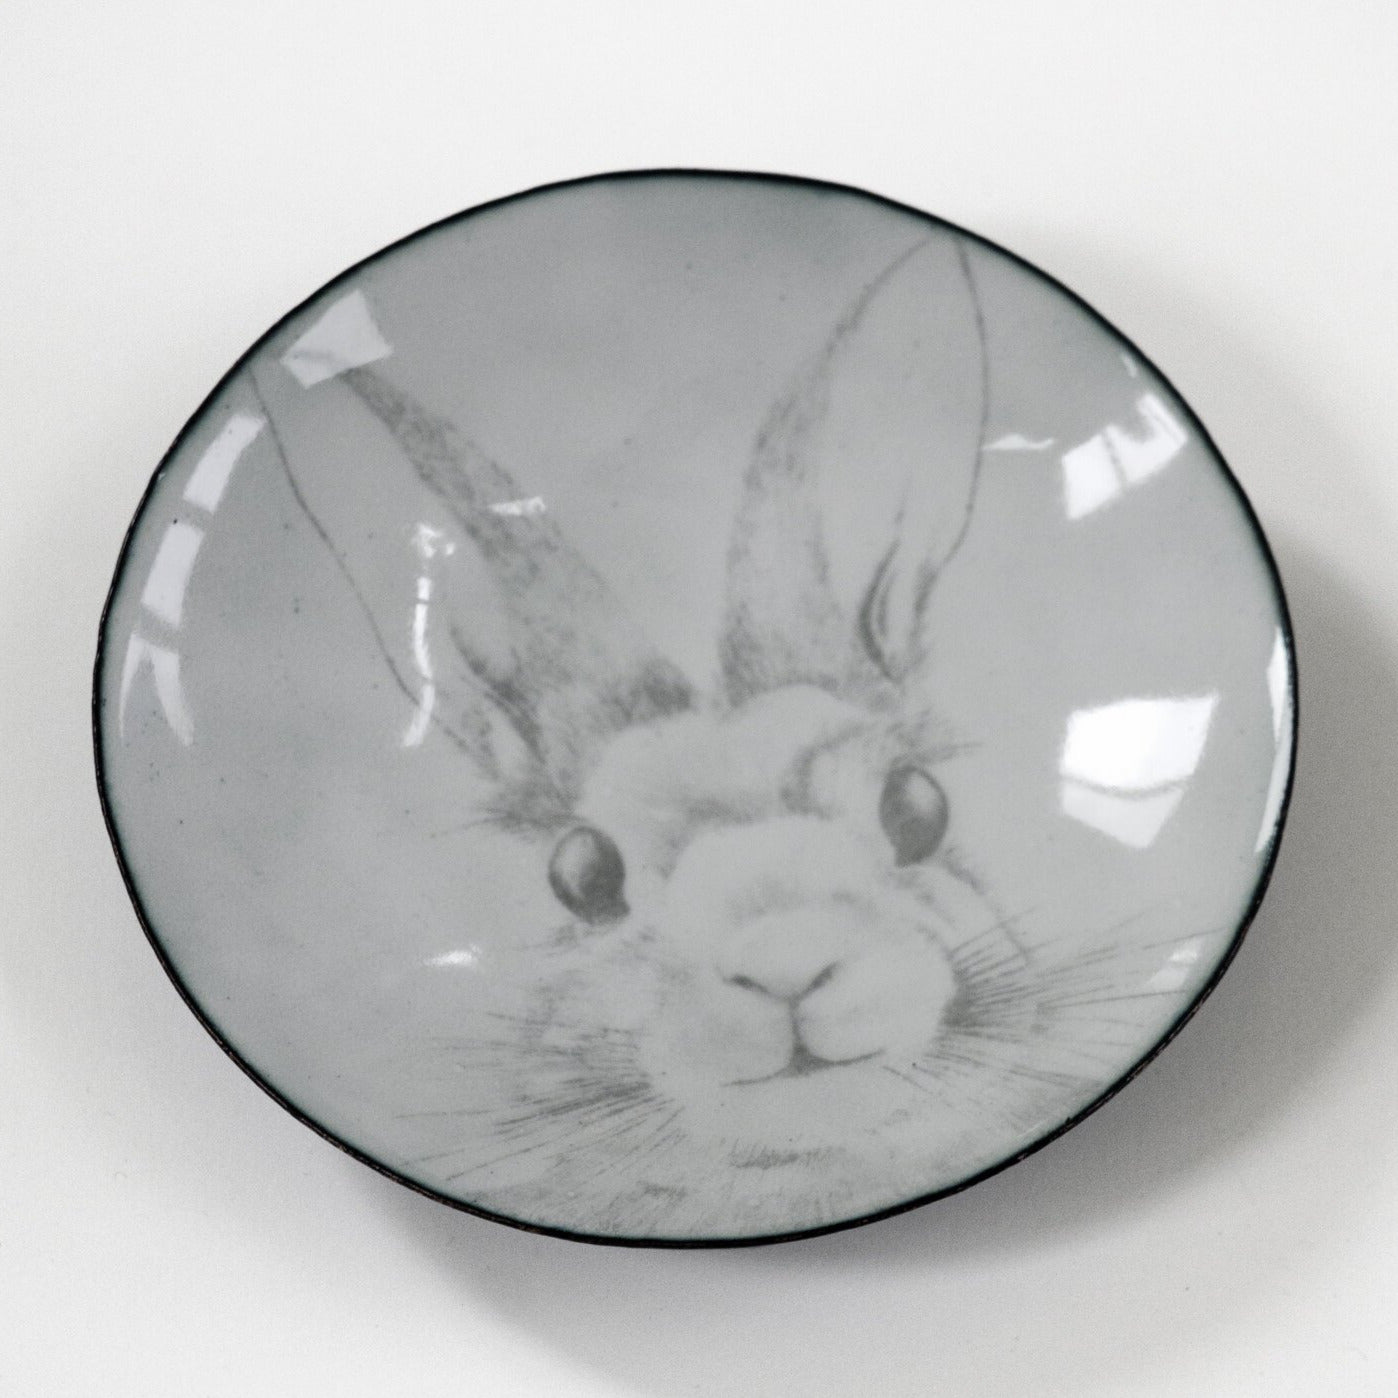 Bunny for your thoughts, enamelware bowl